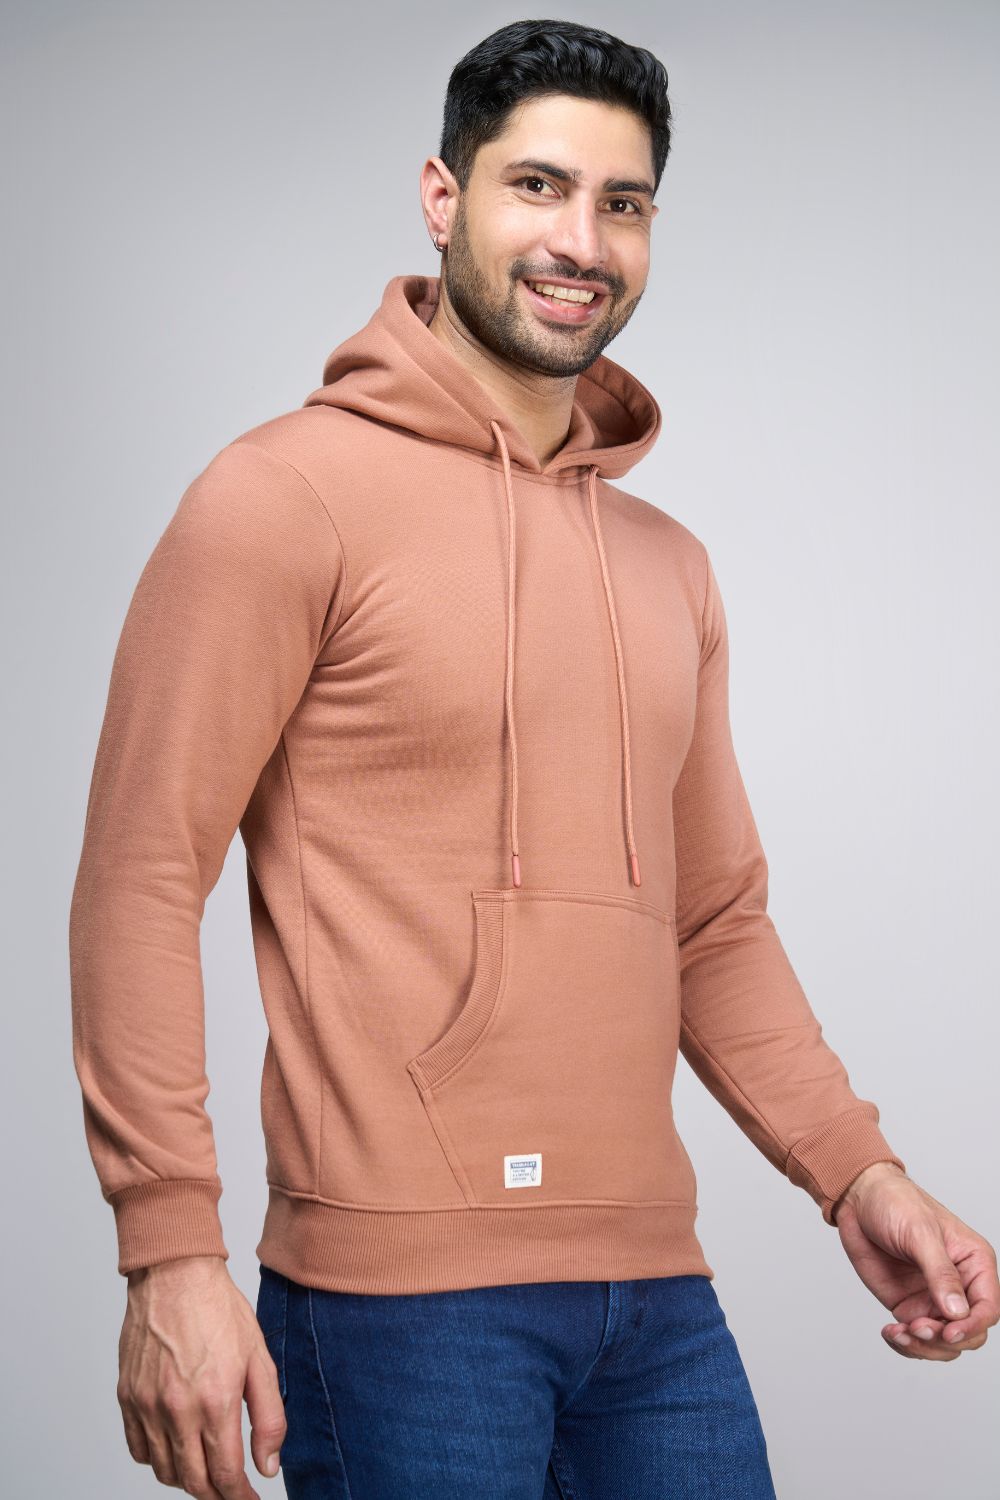 Leather Brown colored, hoodie for men with full sleeves and relaxed fit, pocket view.